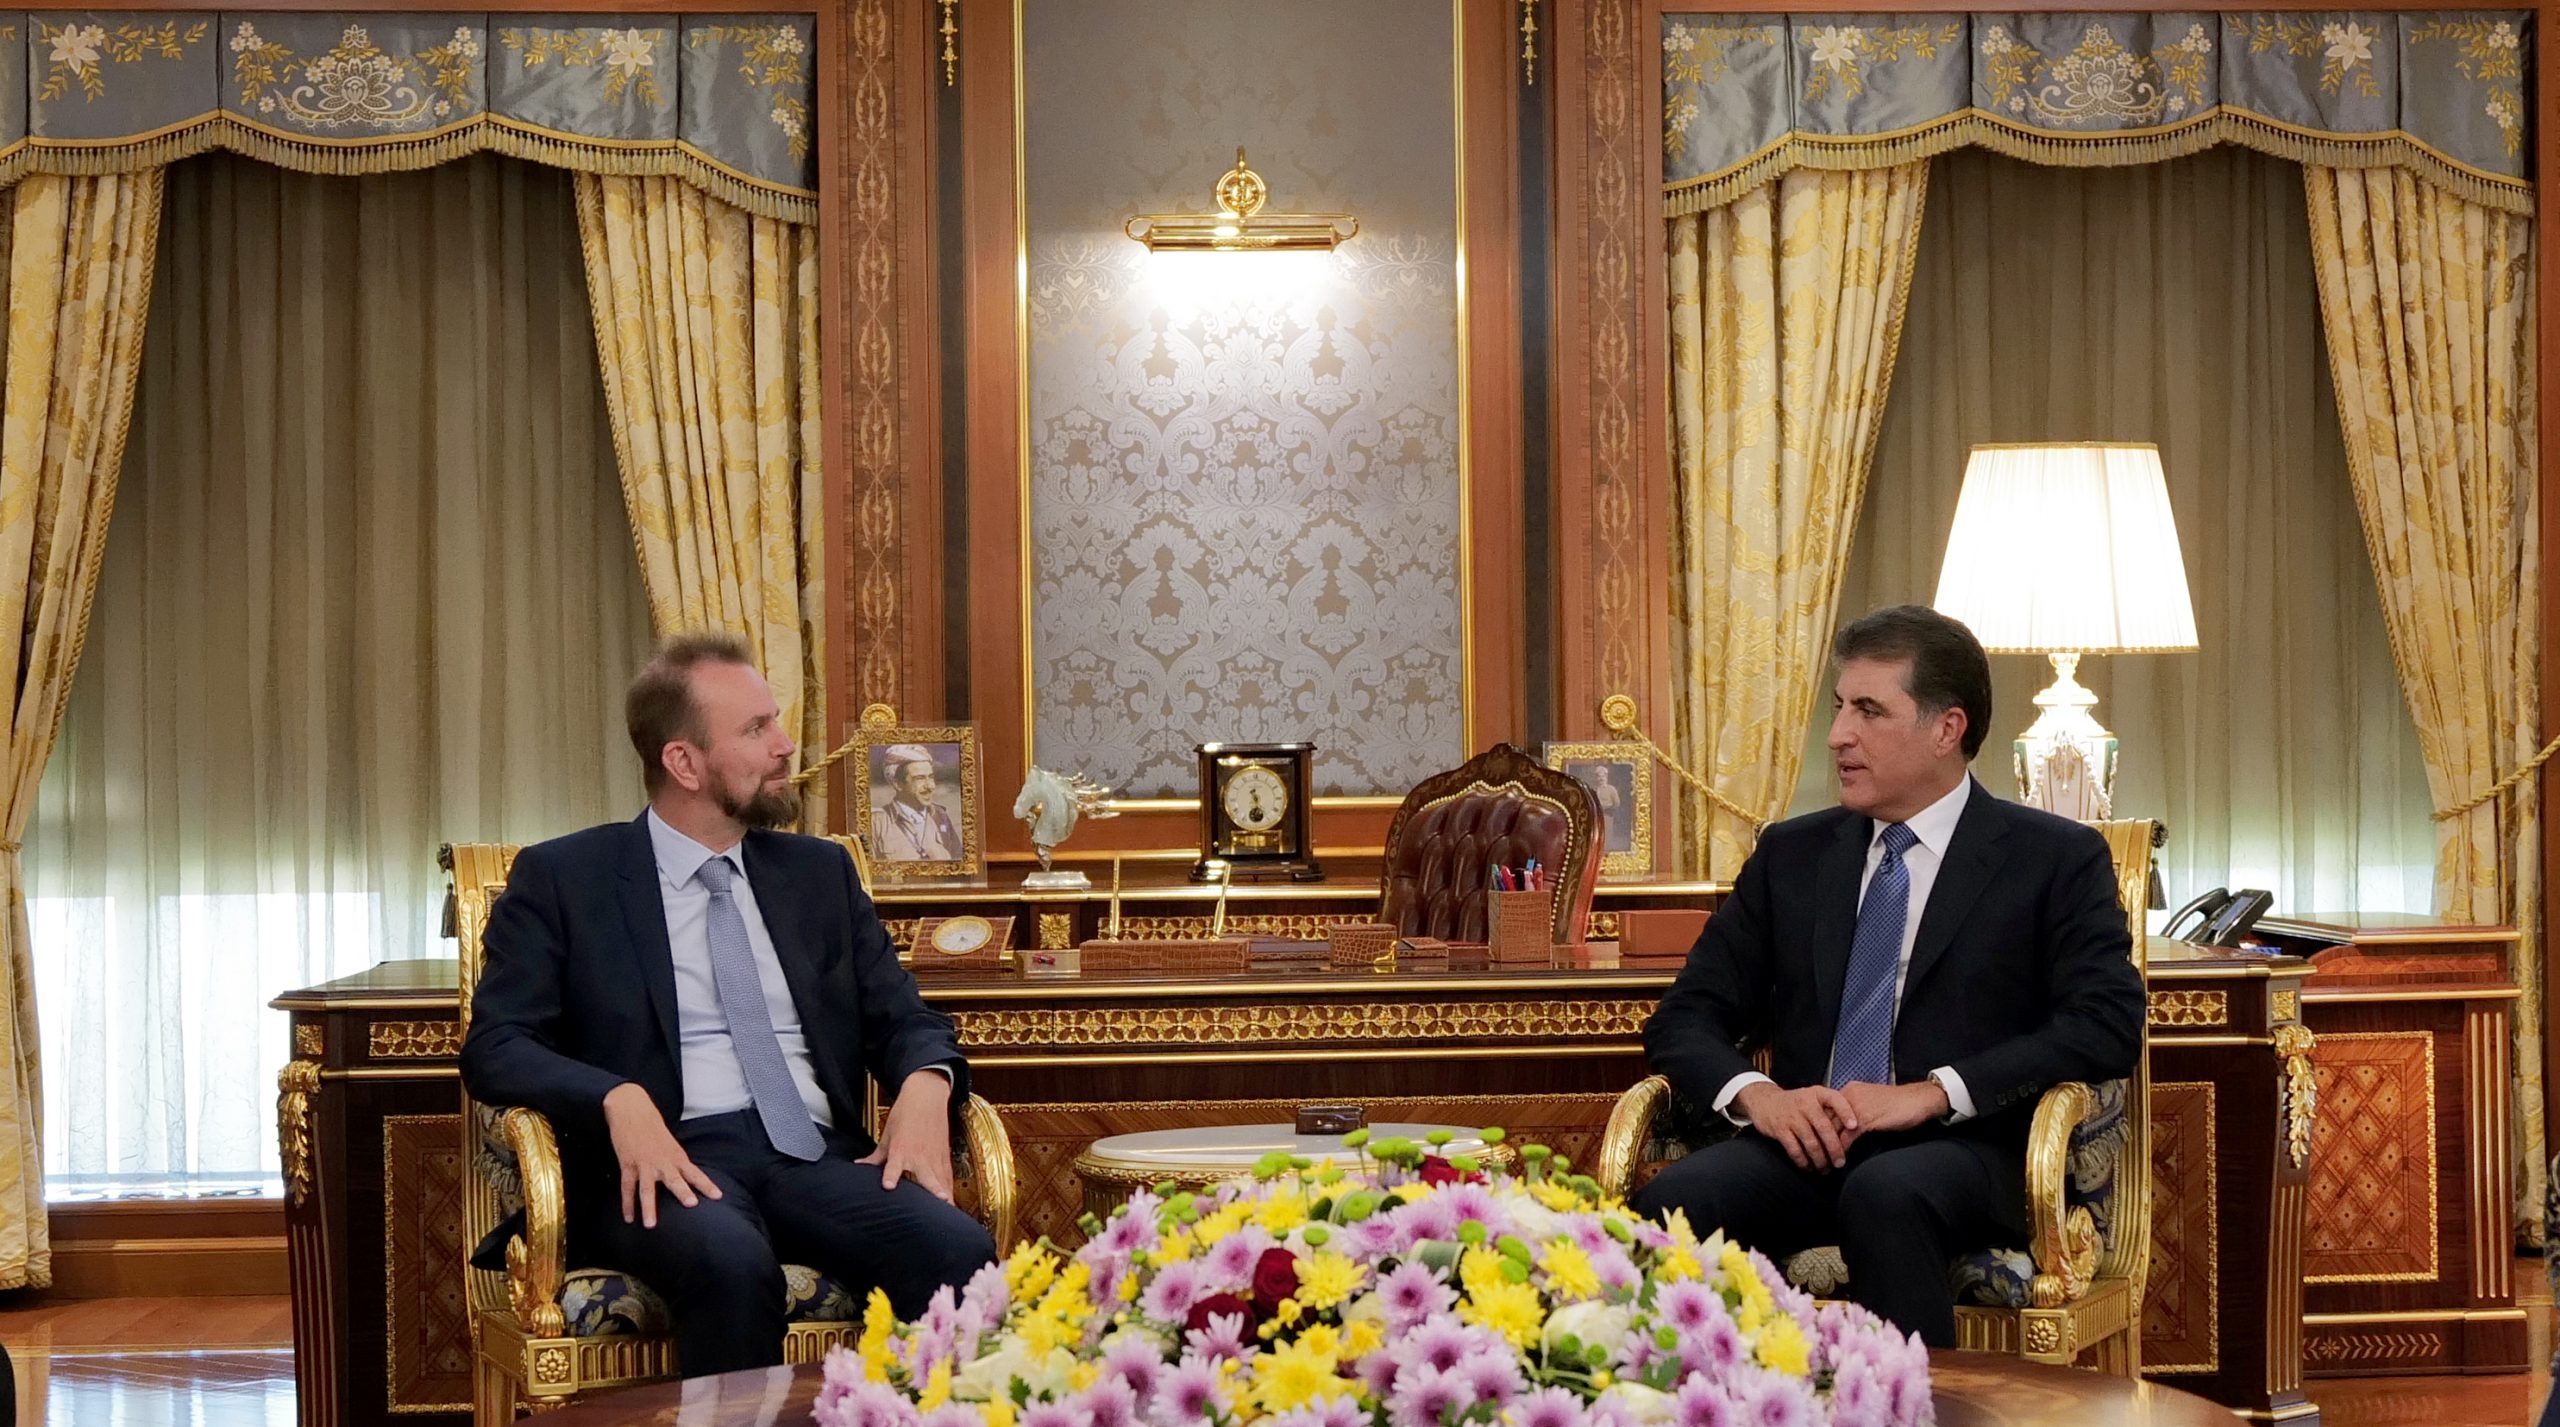 President Nechirvan Barzani Holds Meetings with EU Ambassador and Jordanian Delegation, Discussing Regional Cooperation and International Relations